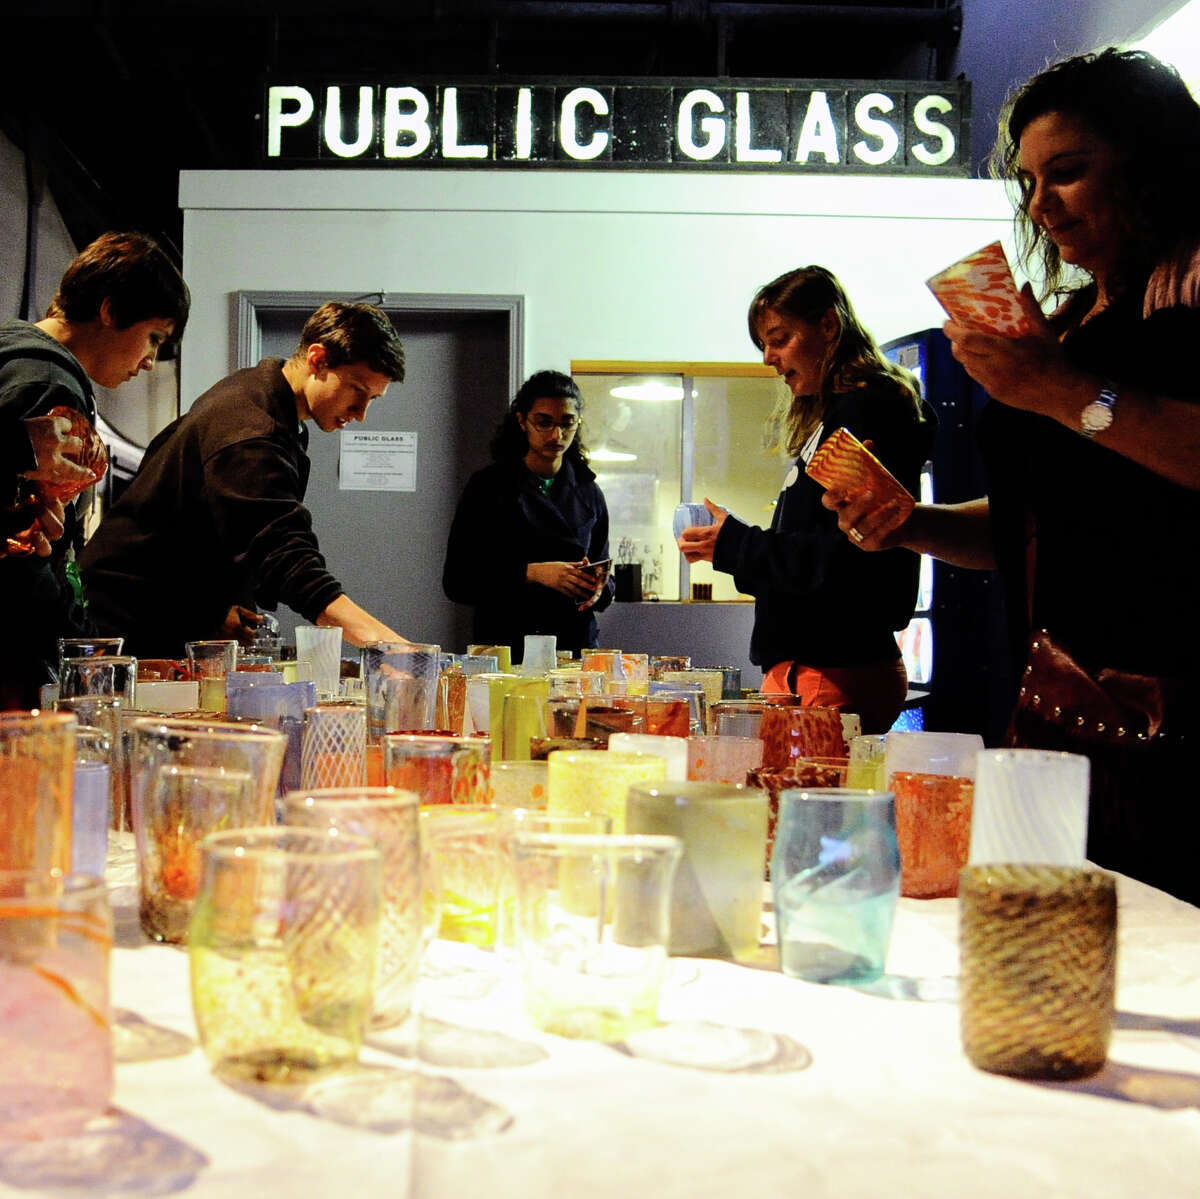 A table holds glass art that is given away at the Hot Glass Cold Beer event. A 'Public Glass' sign is over the table and people are milling around